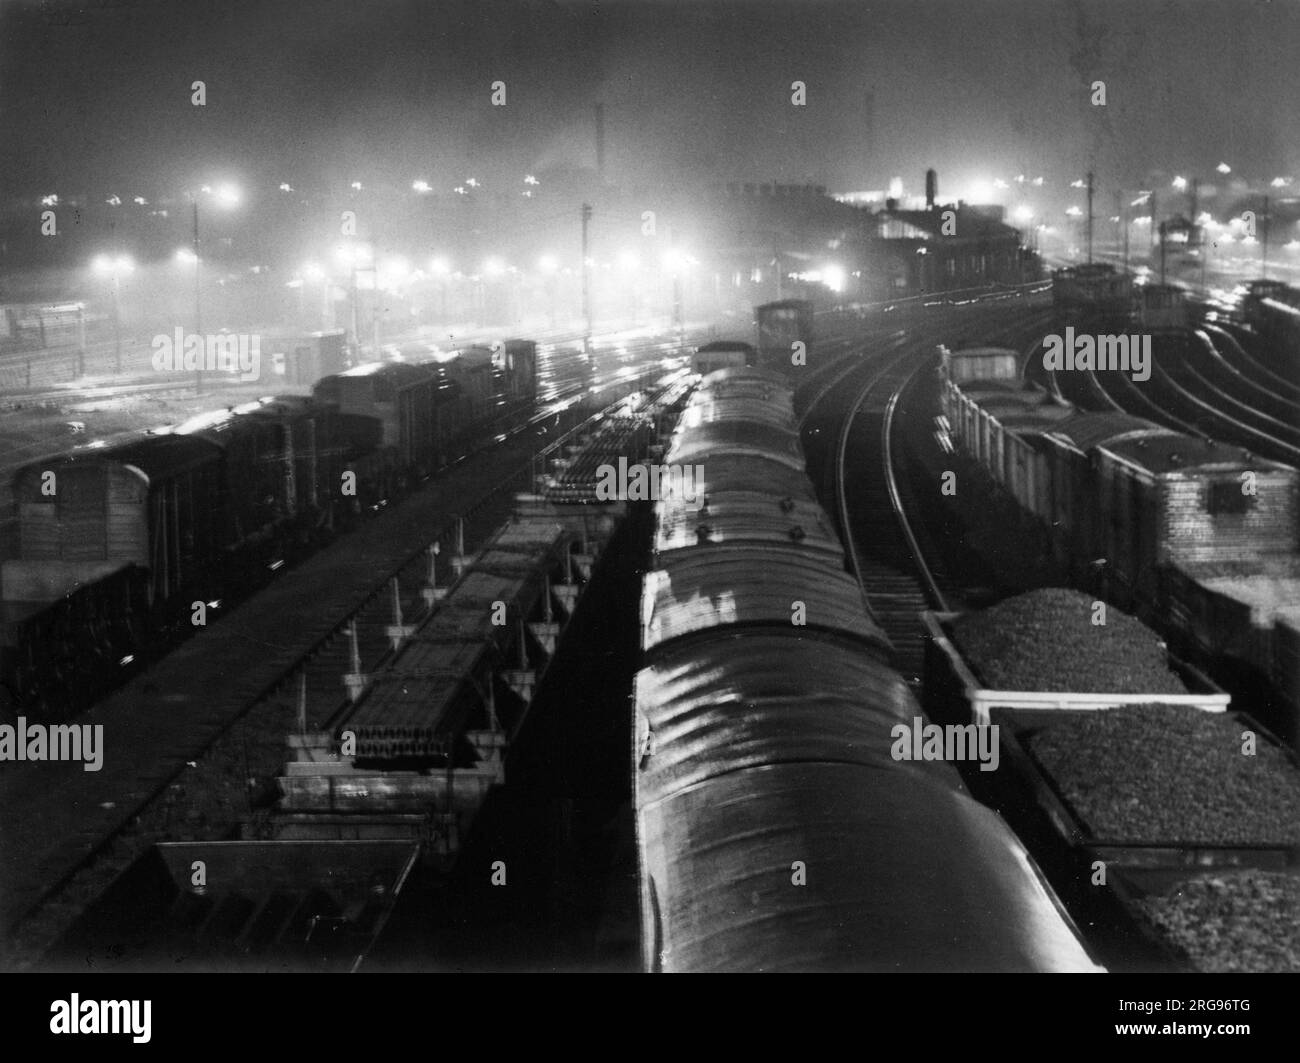 Atmospheric view of a railway station at night. Stock Photo